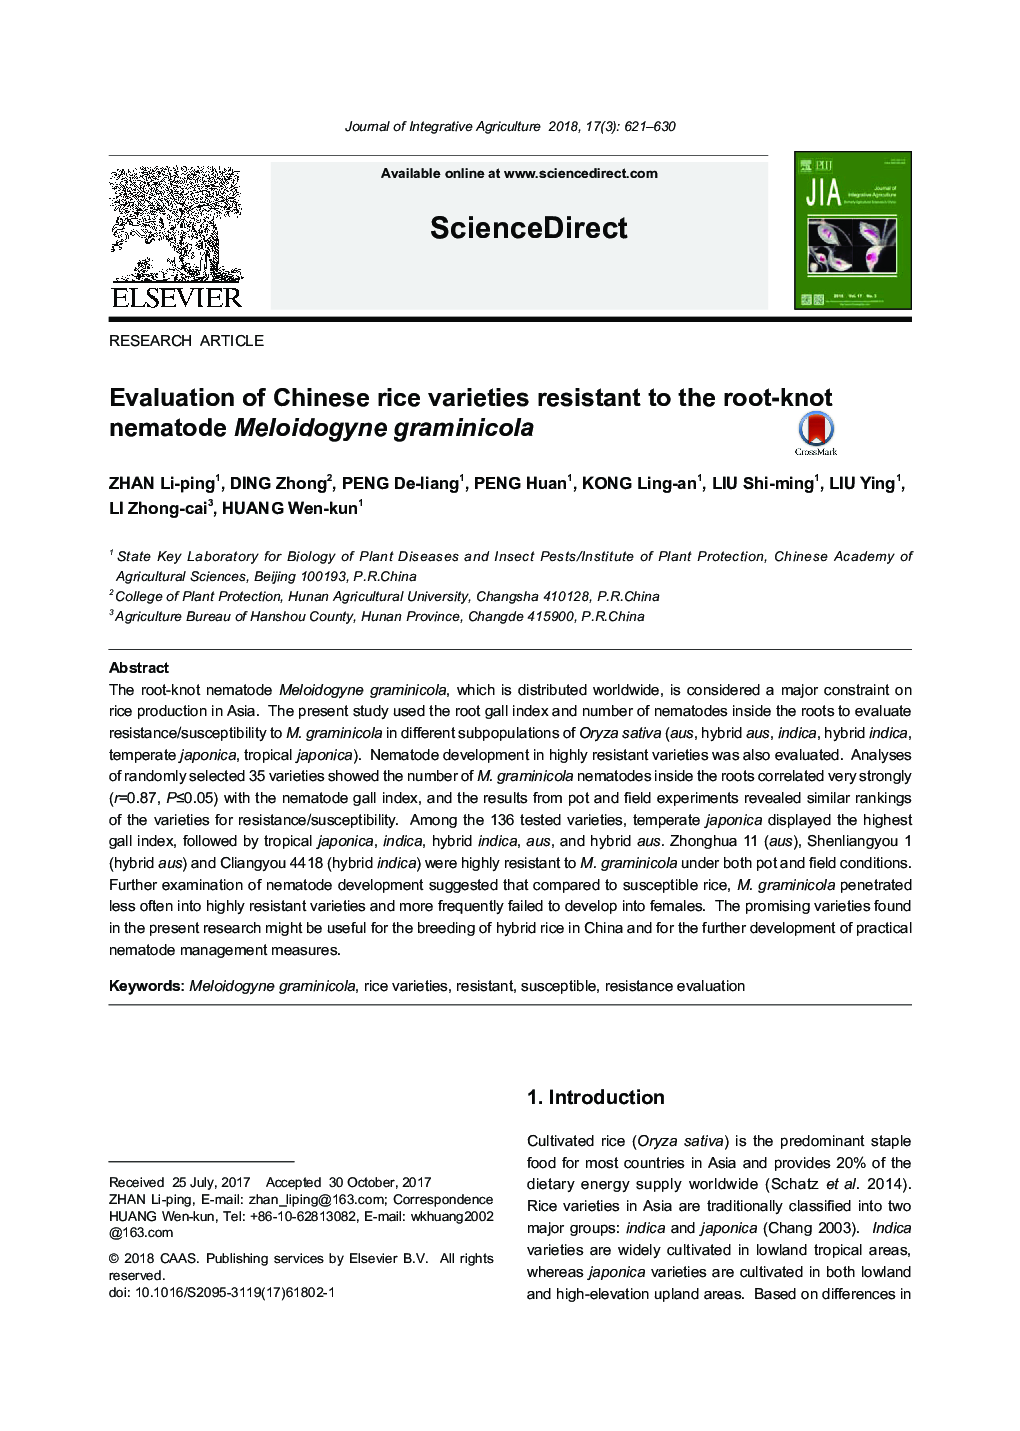 Evaluation of Chinese rice varieties resistant to the root-knot nematode Meloidogyne graminicola